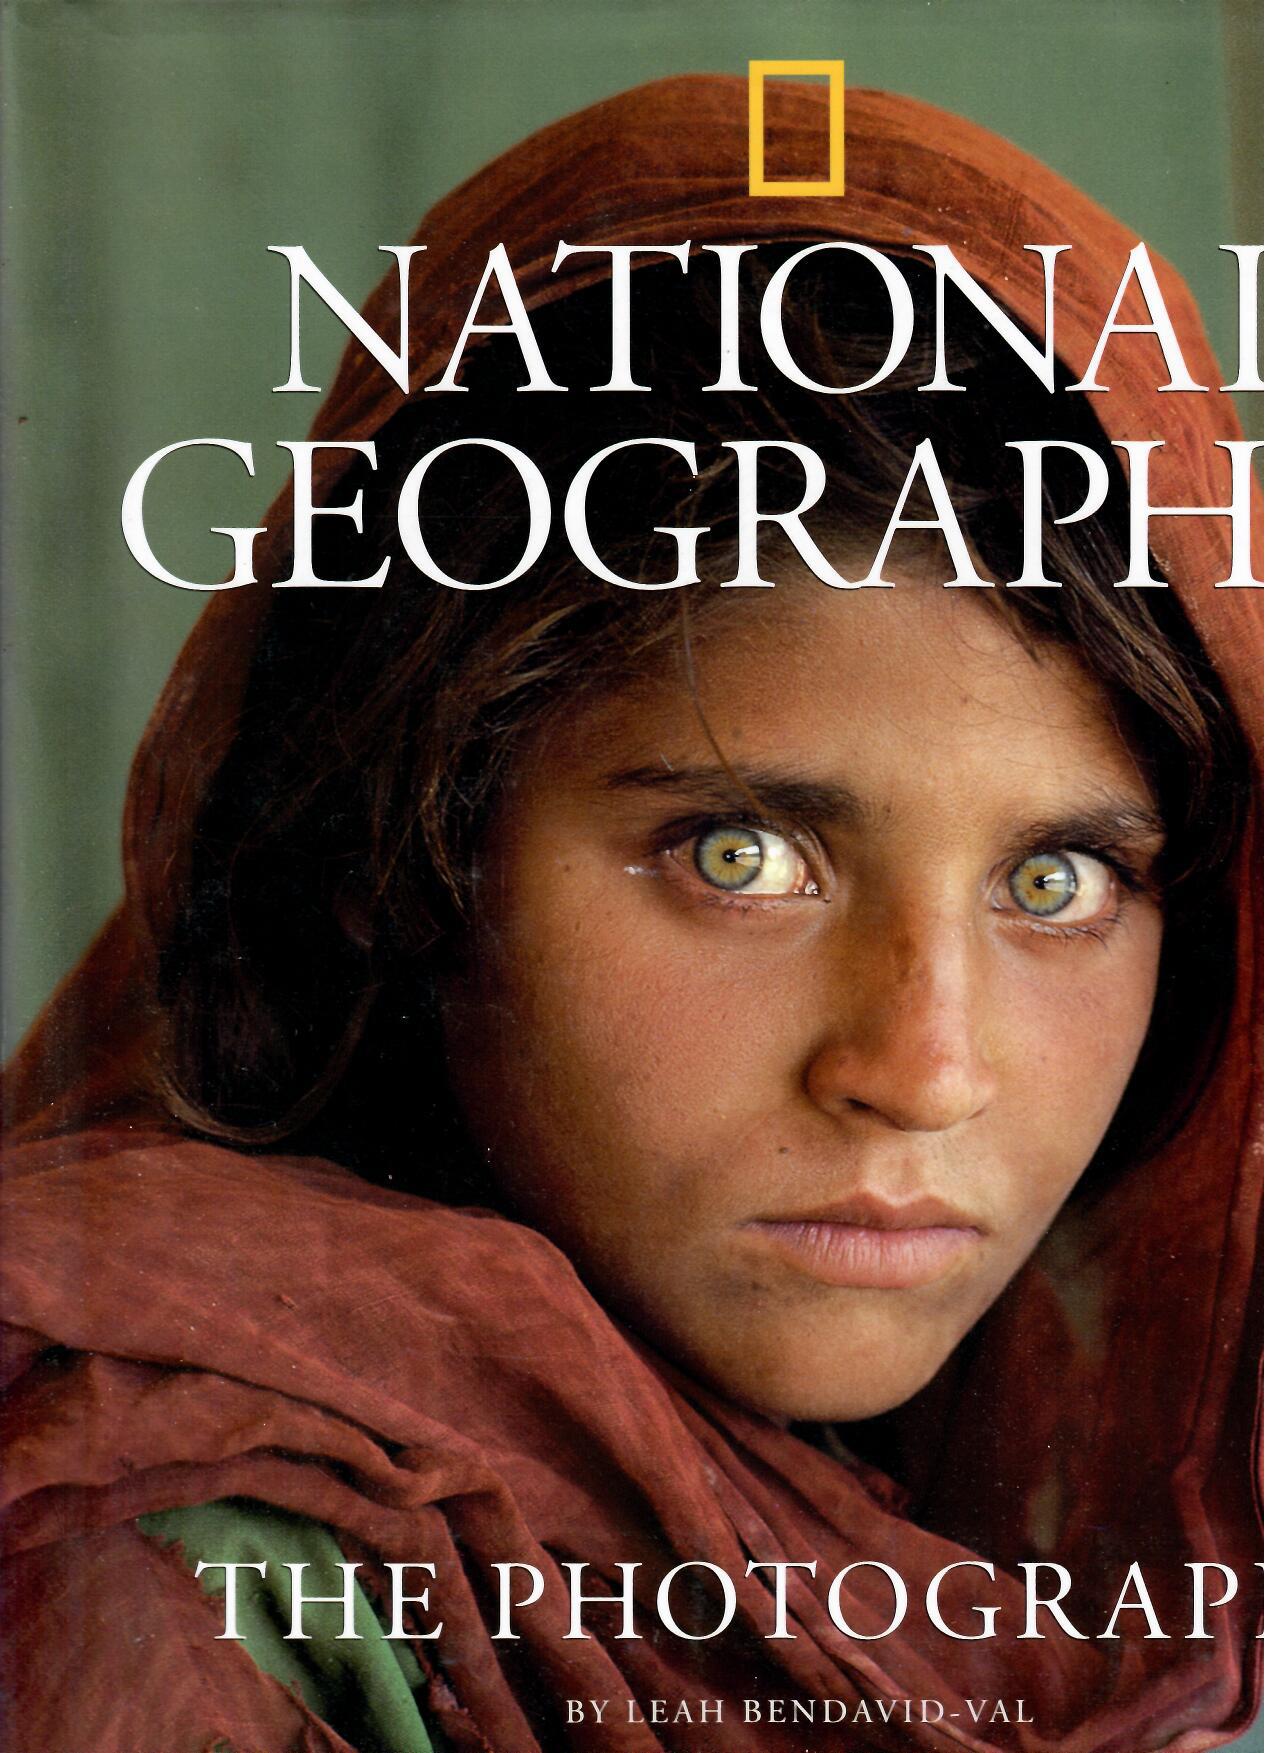 National Geographic. The Photographs by Leah Bendavid-Val